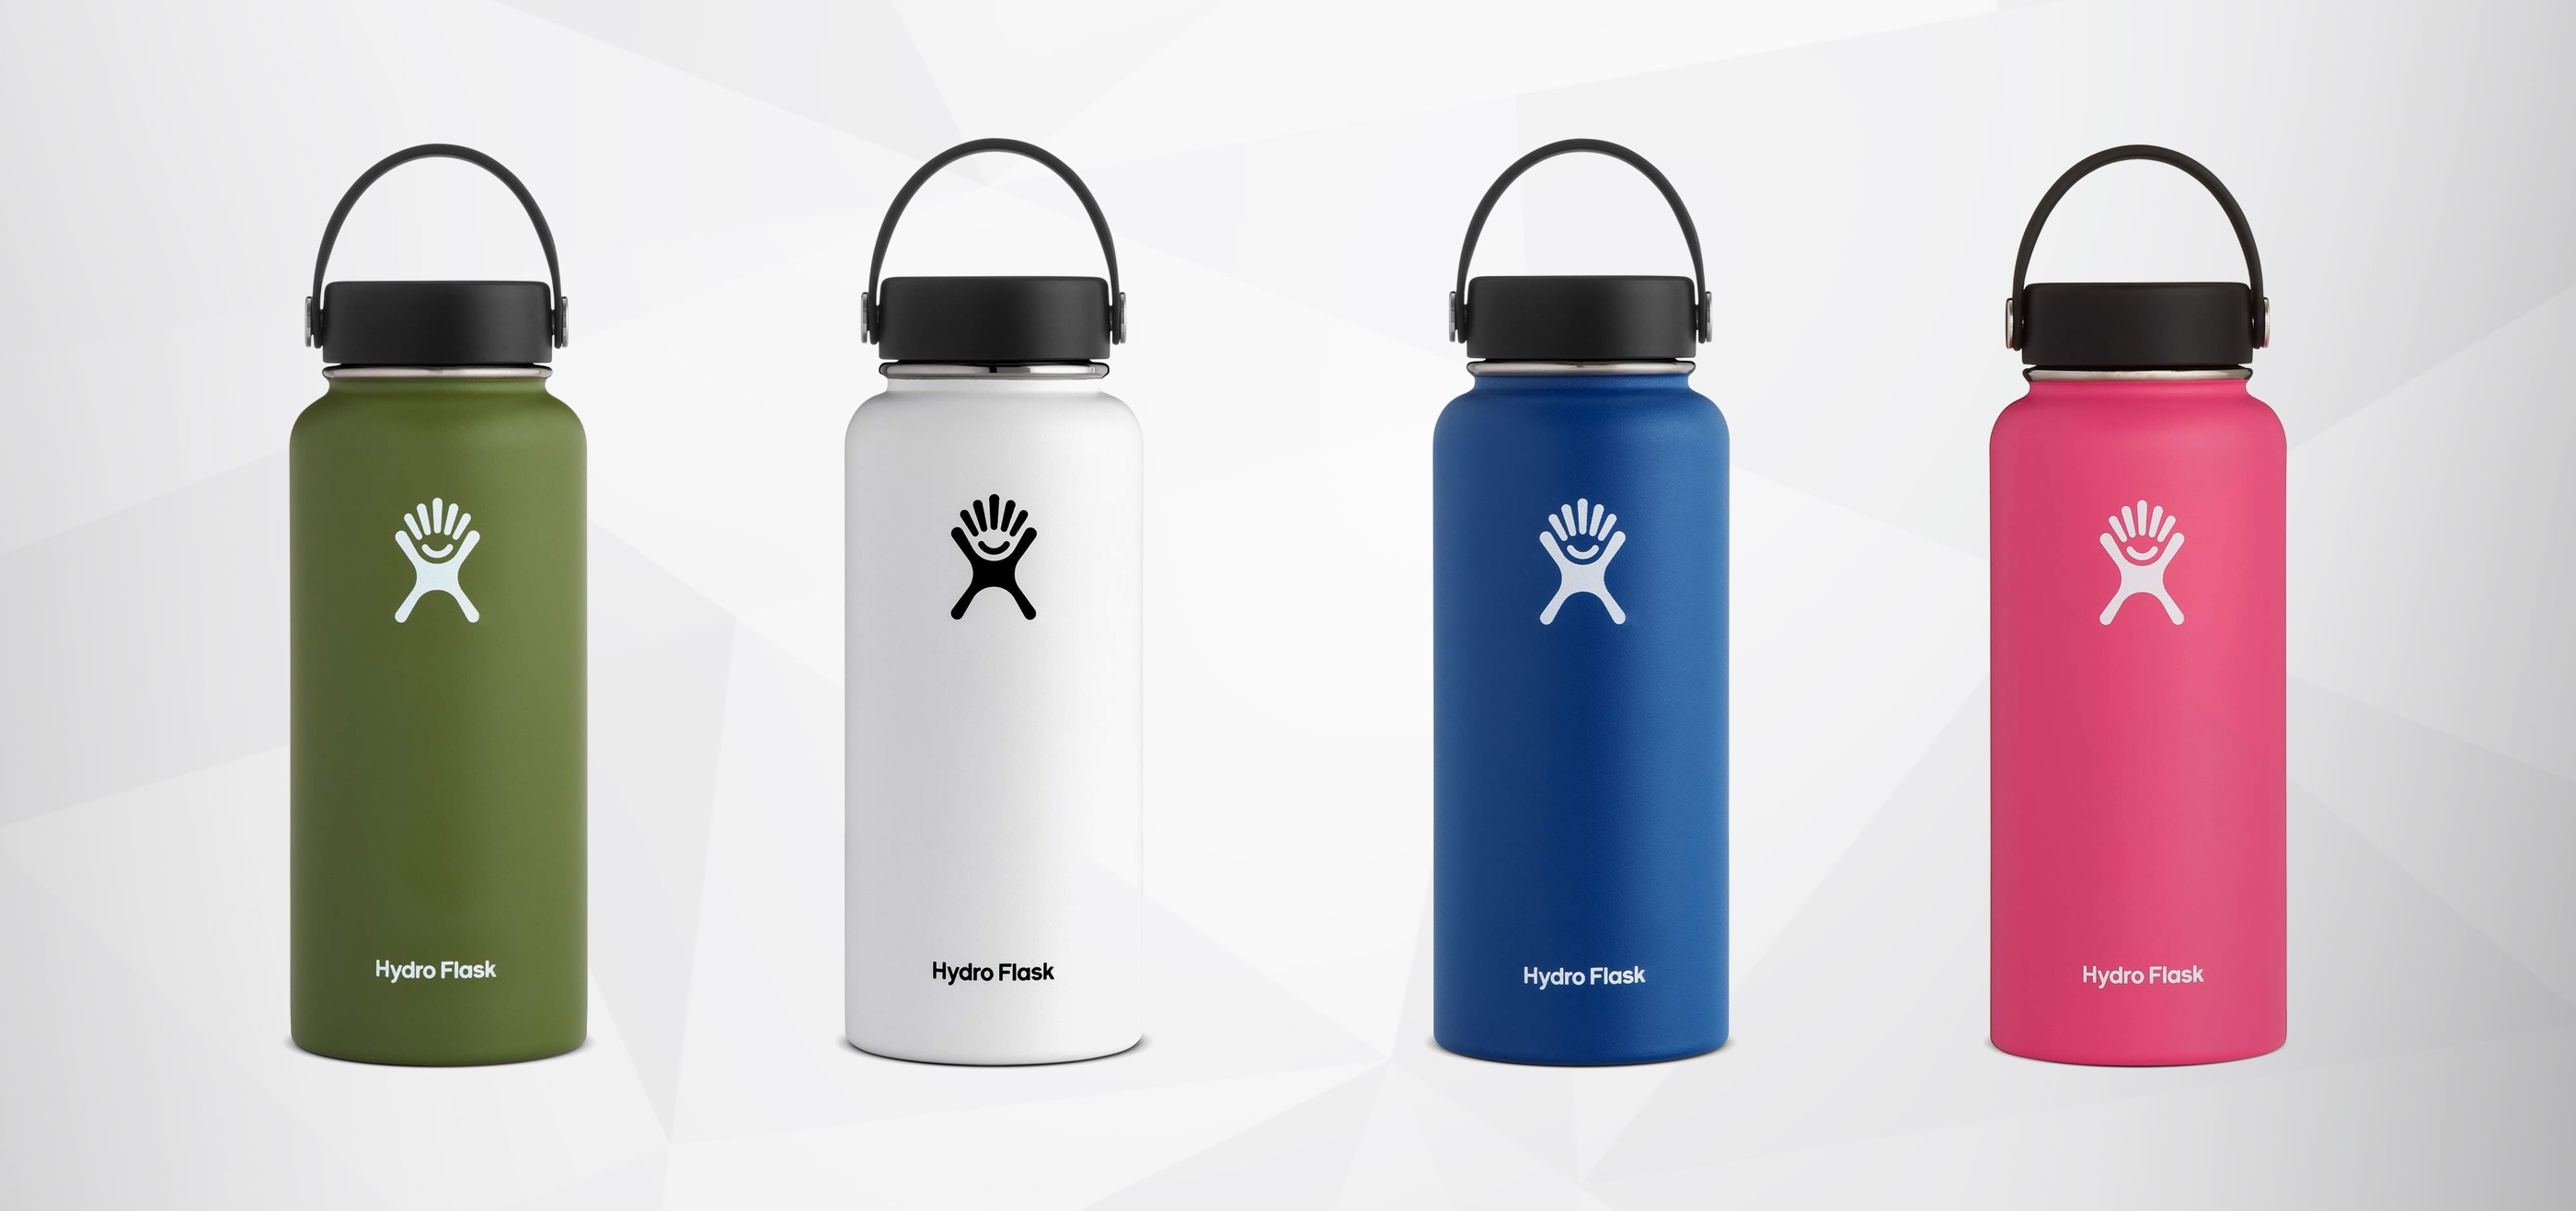 Hydroflask Gifts for Rock Climbers